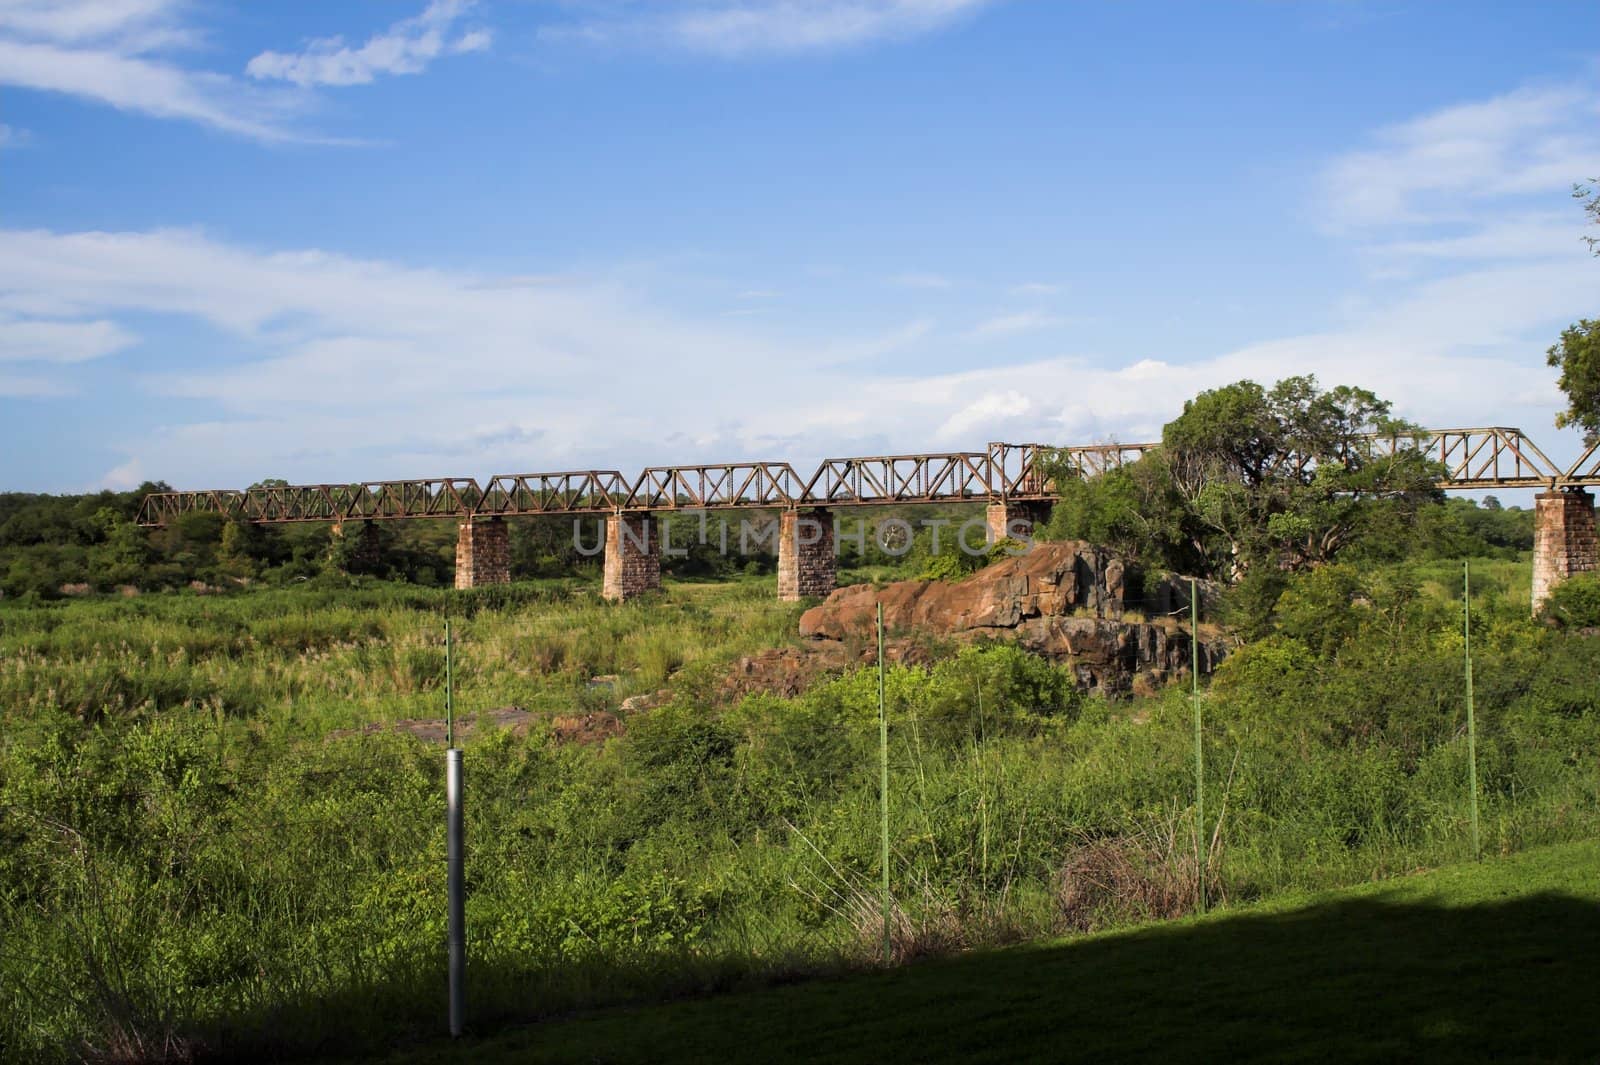 Old Railroad bridge at Skukuza in the Kruger National Park by nightowlza